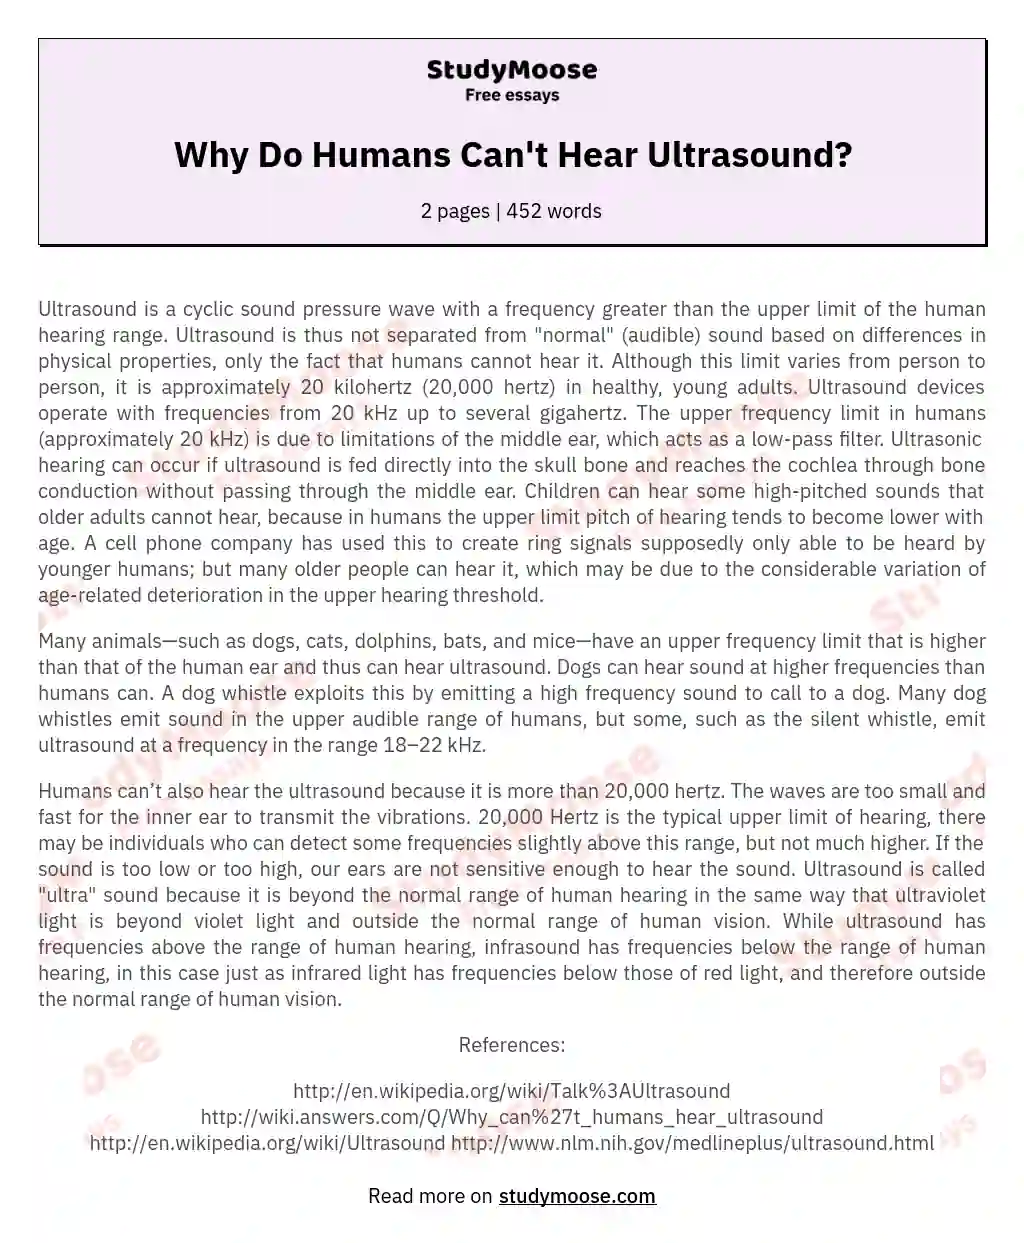 Why Do Humans Can't Hear Ultrasound? essay